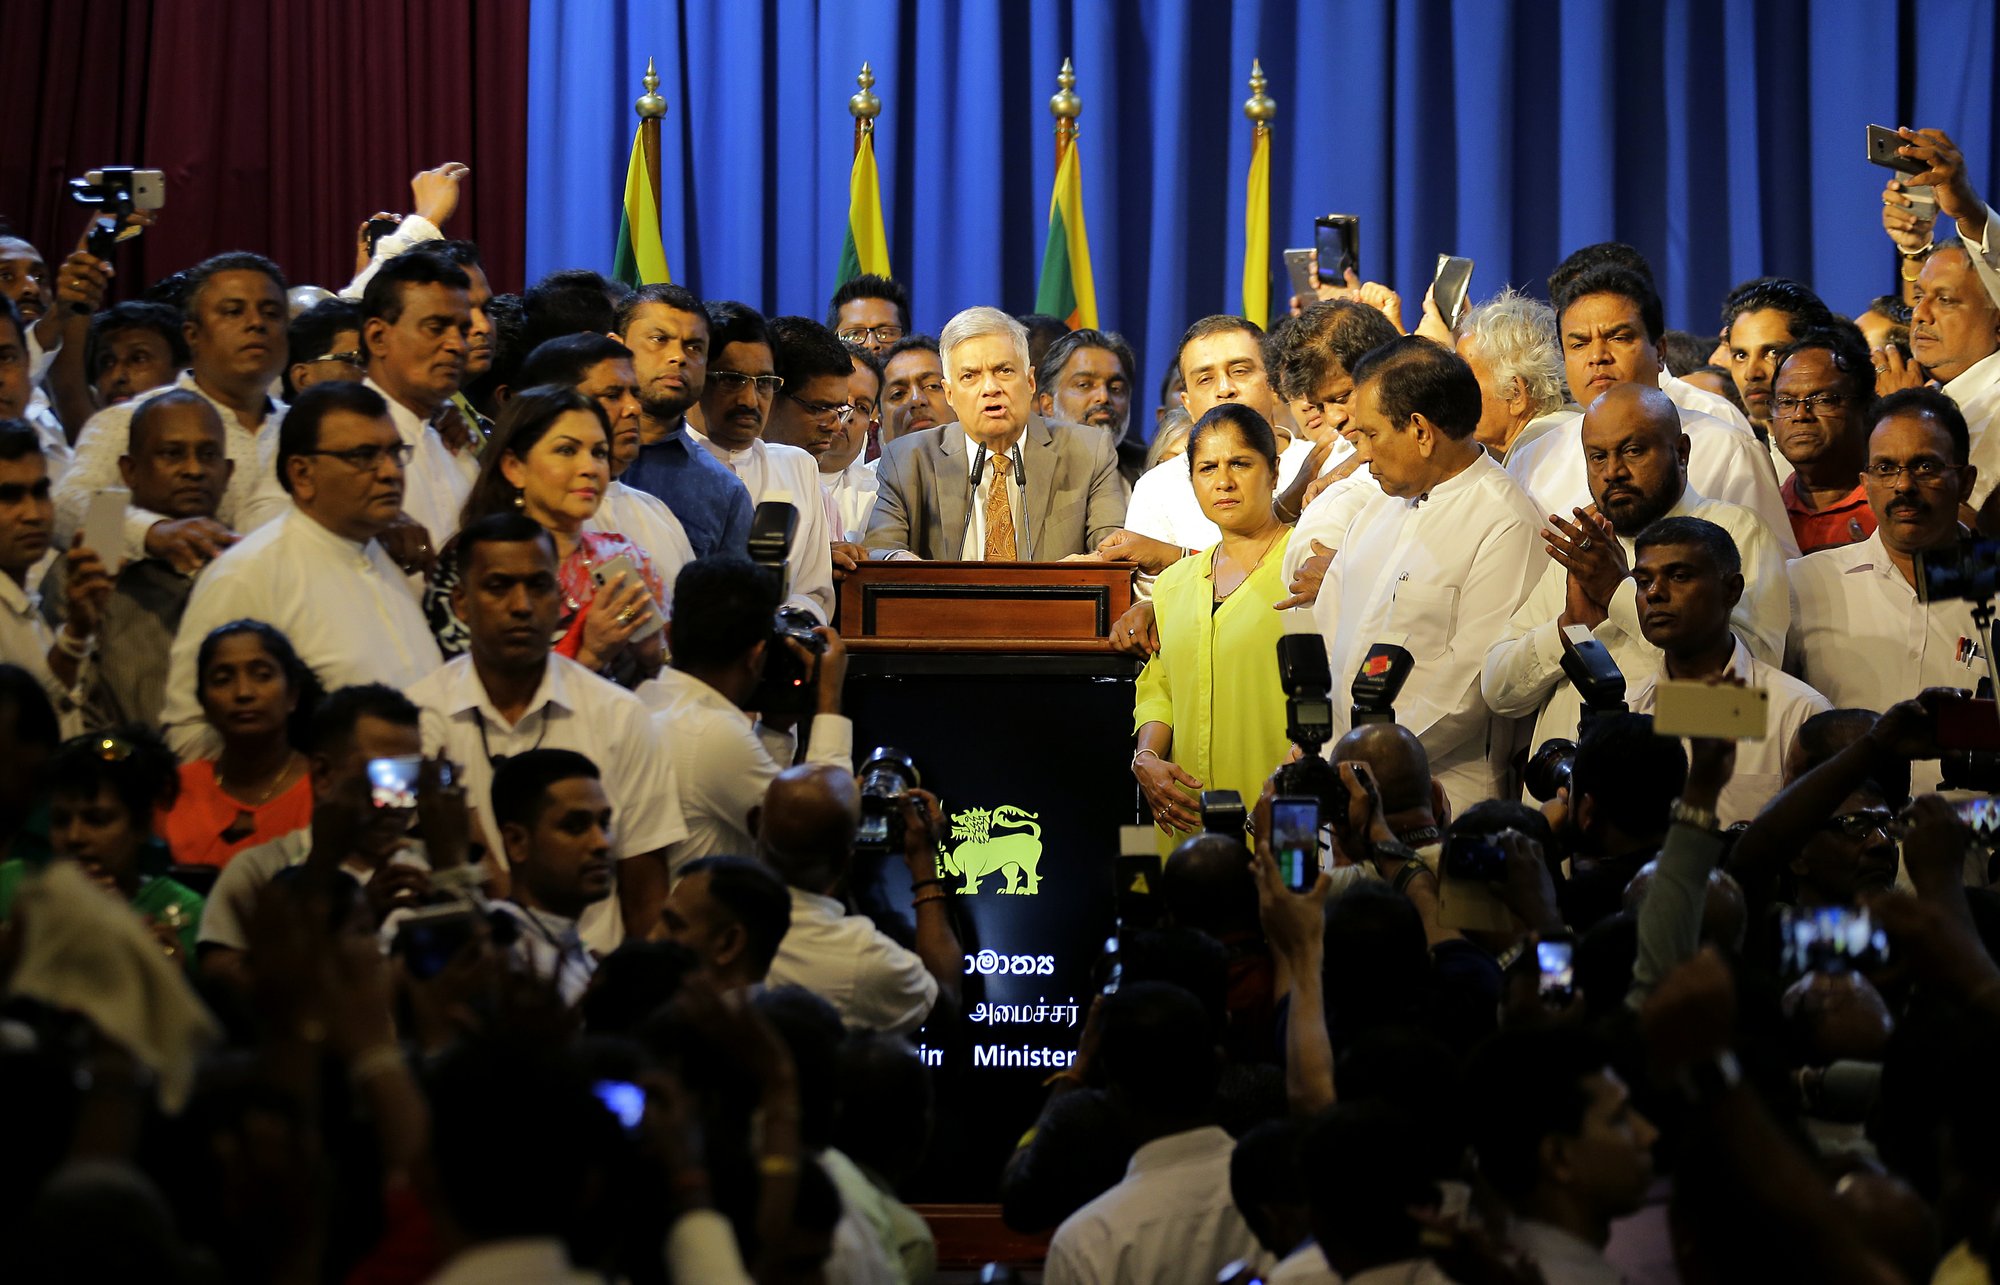 Sri Lanka's reinstated Prime Minister Ranil Wickeremesinghe, center, surrounded by his loyal lawmakers and supporters speaks after assuming duties in Colombo, Sri Lanka, on Sunday, Dec. 16, 2018. Photo: AP